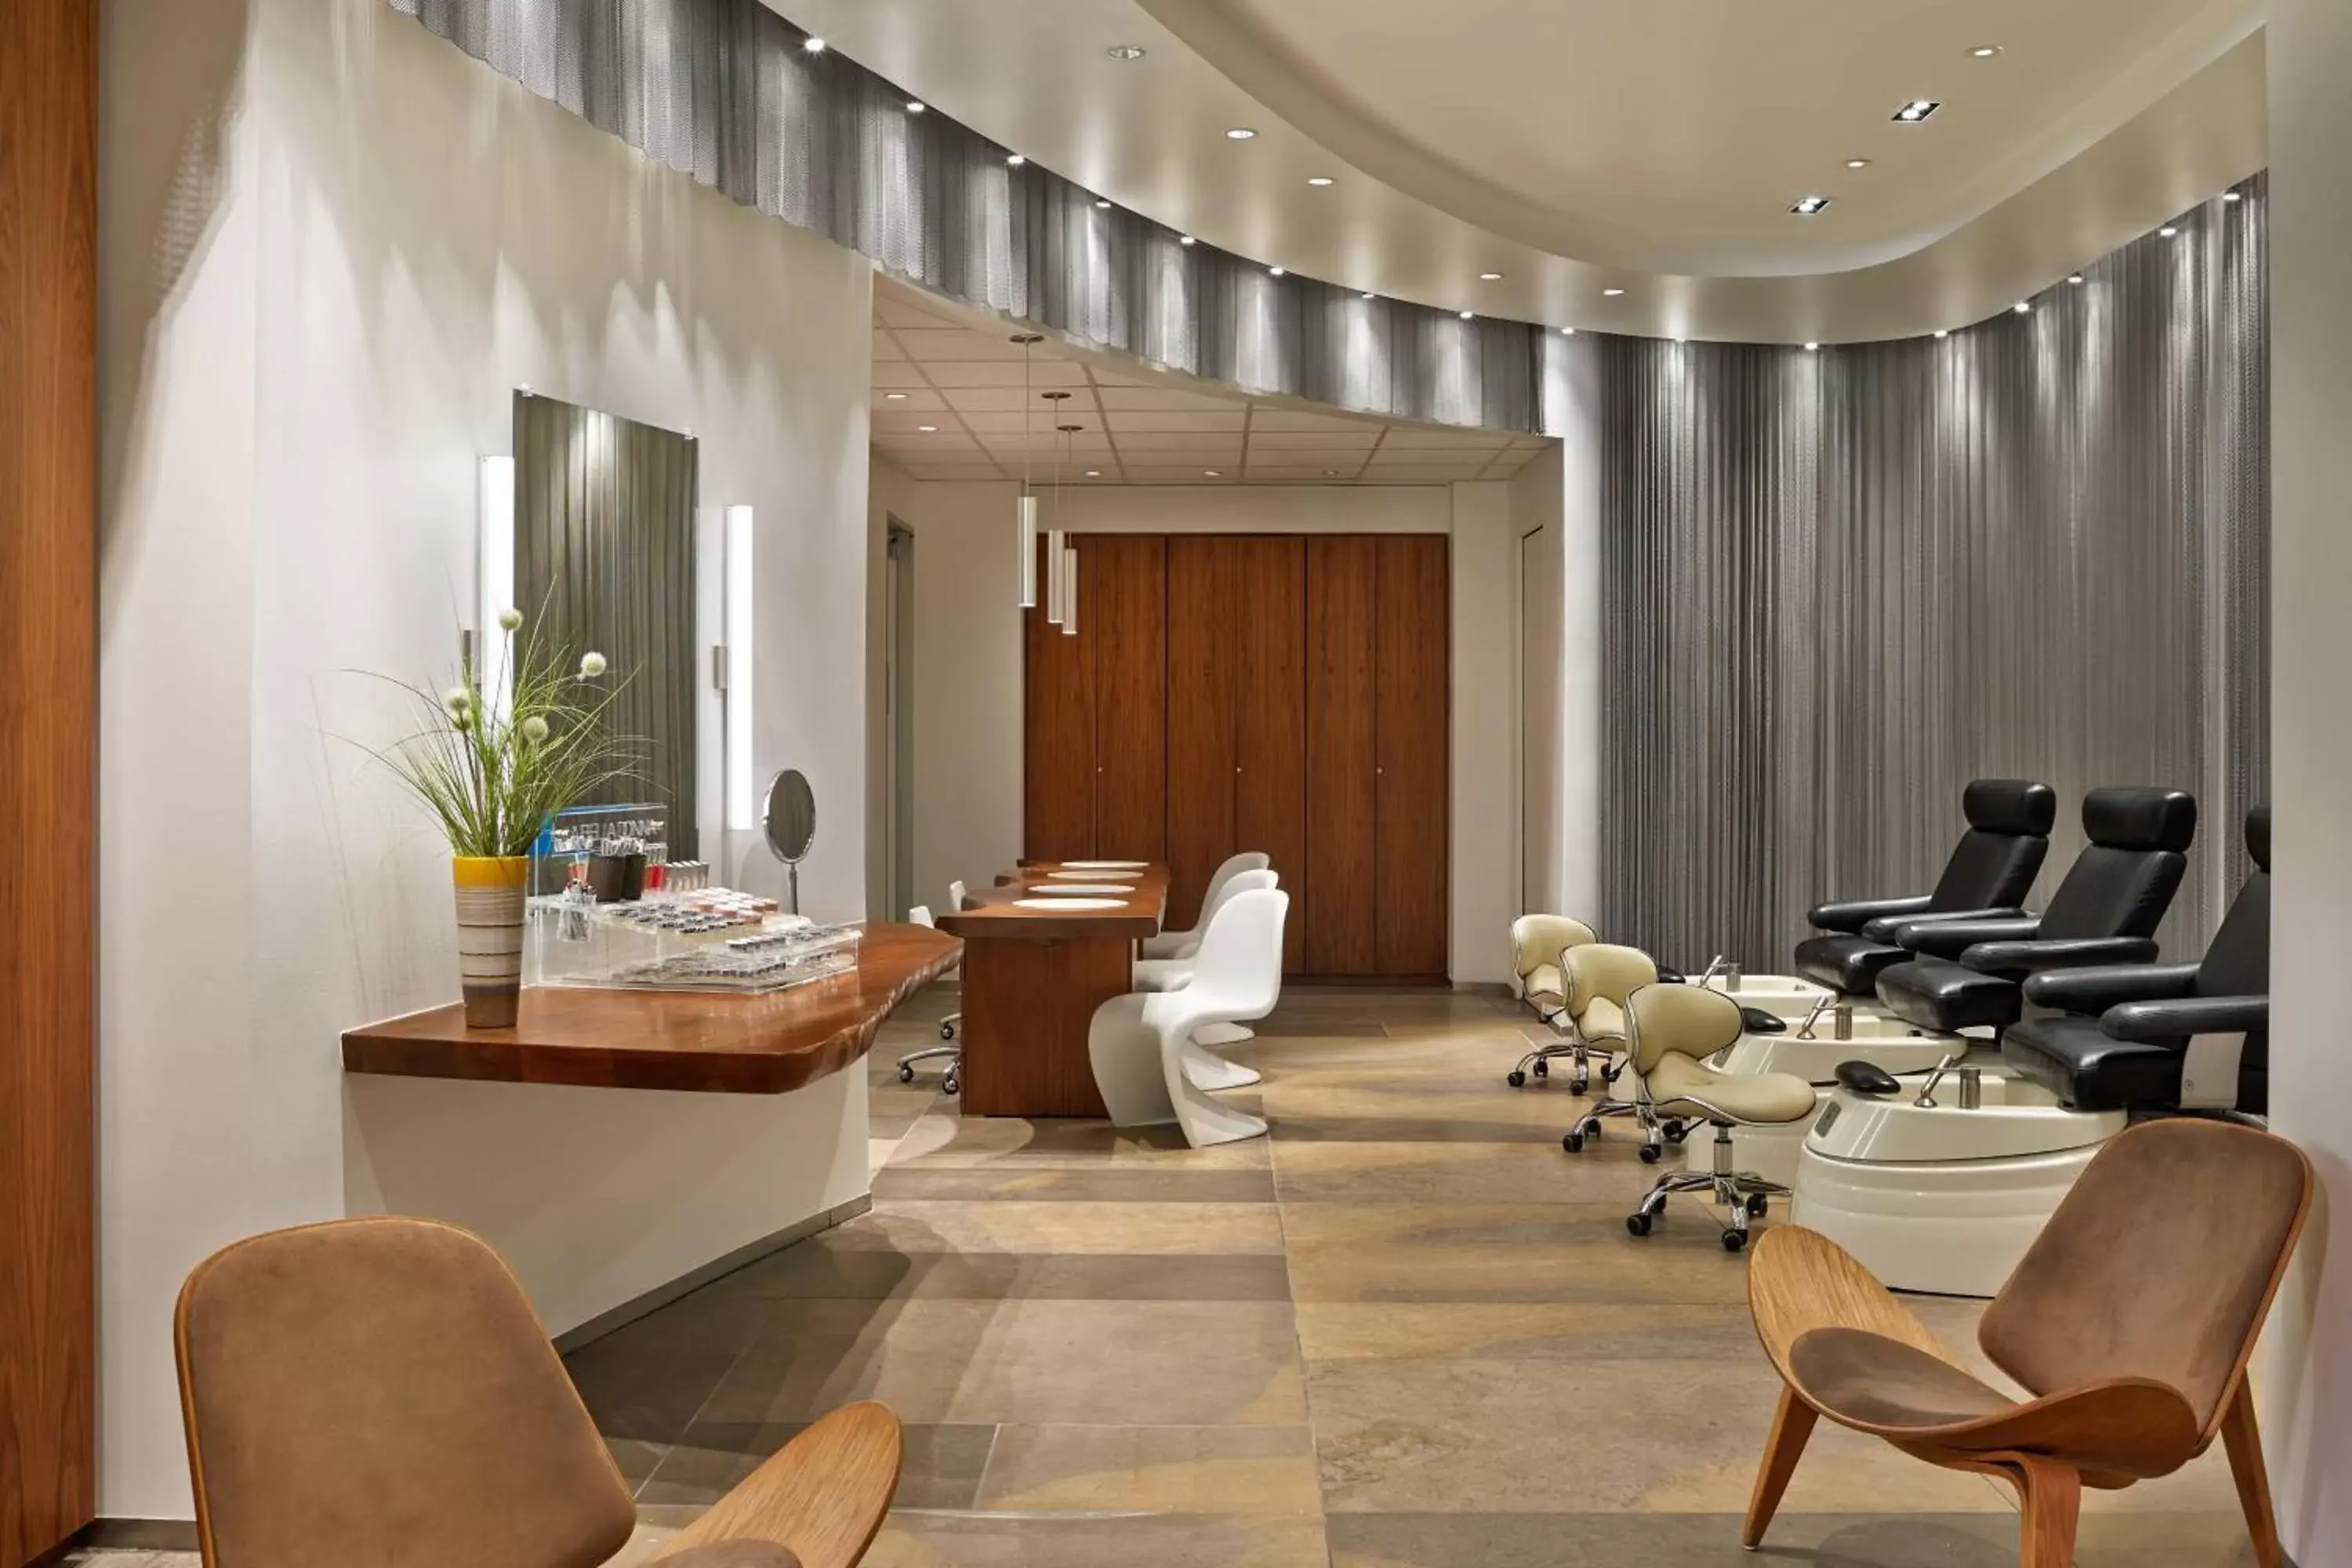 Spa and wellness centre/facilities in The Westin Riverfront Resort & Spa, Avon, Vail Valley